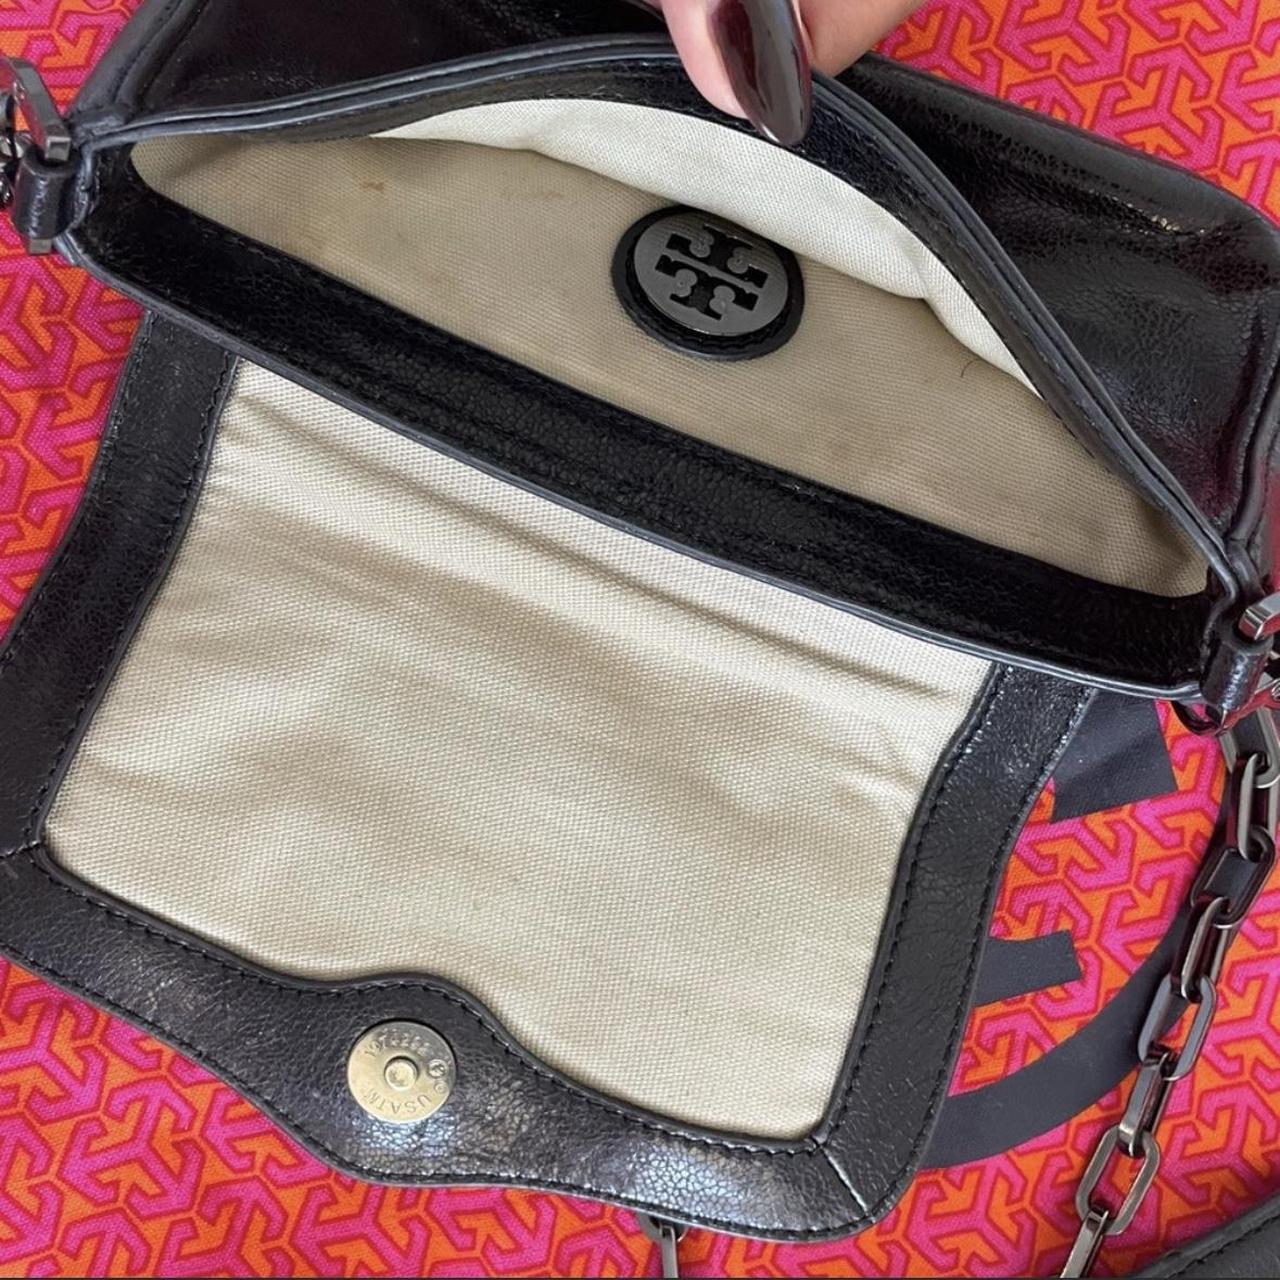 Authentic Tory Burch Bag